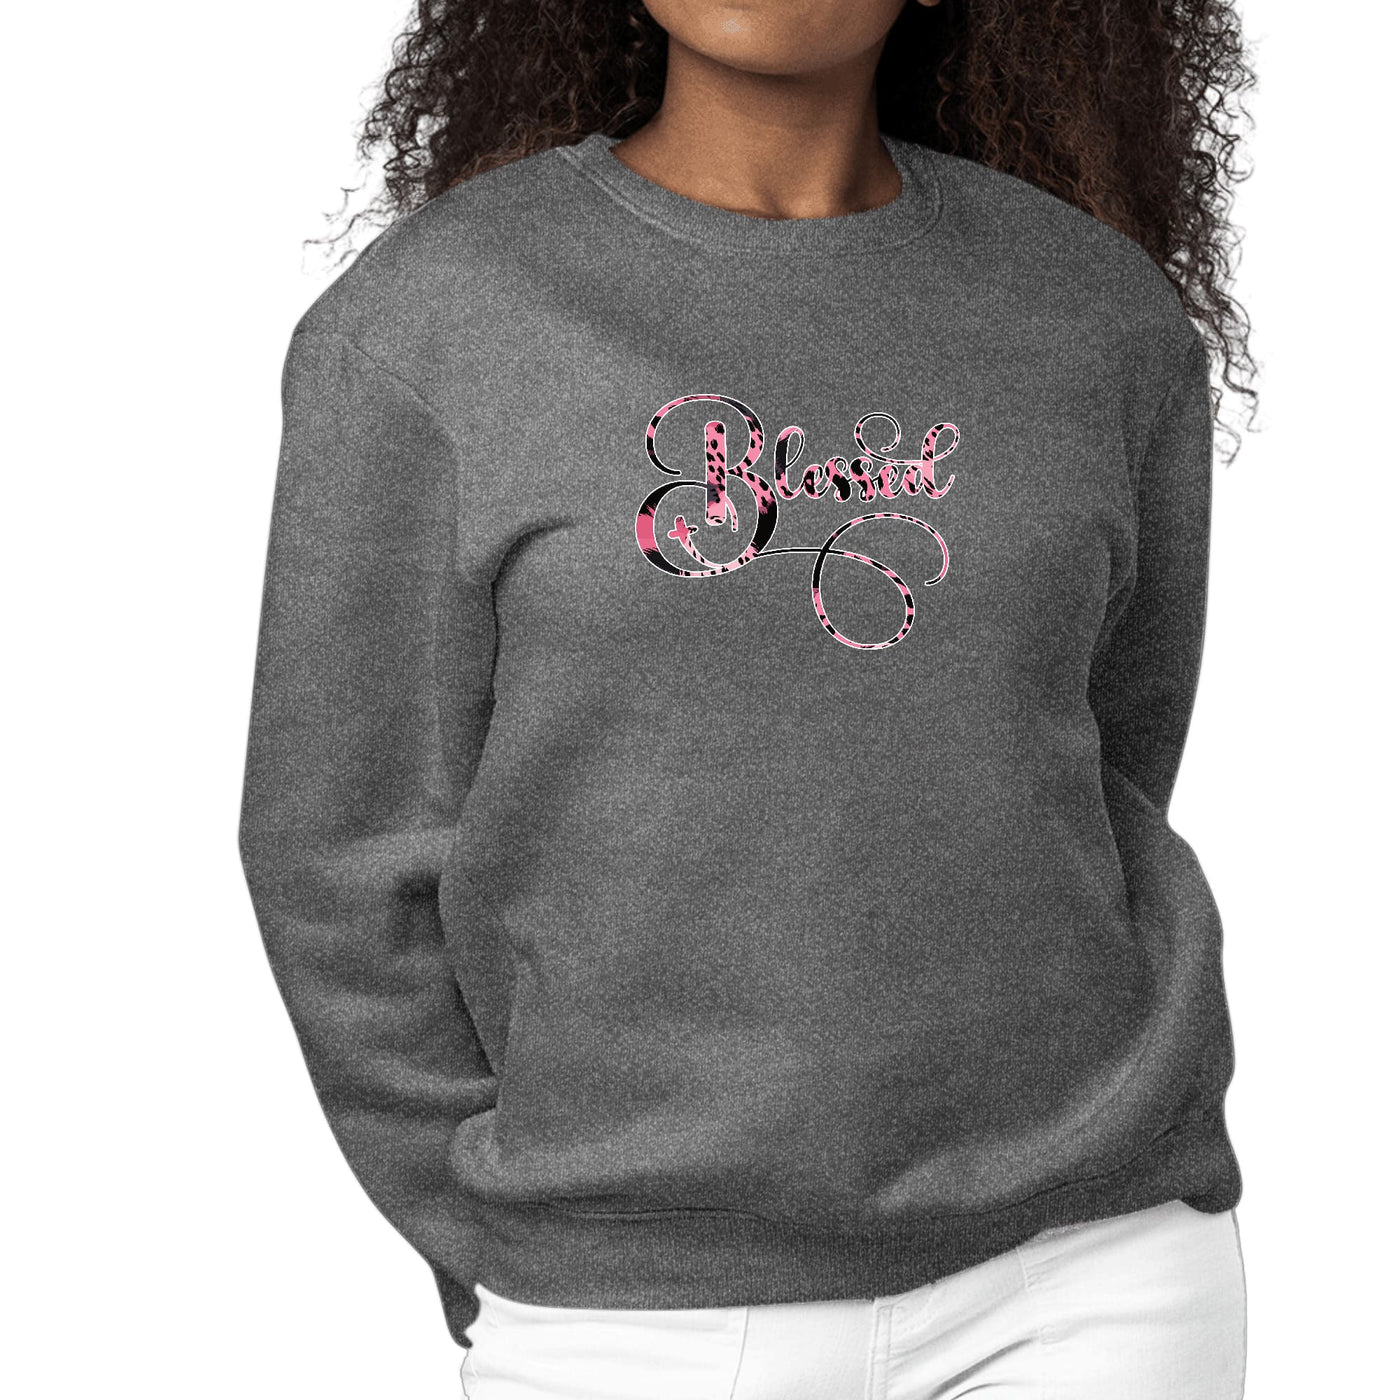 Womens Graphic Sweatshirt Blessed Pink And Black Patterned Graphic - Womens